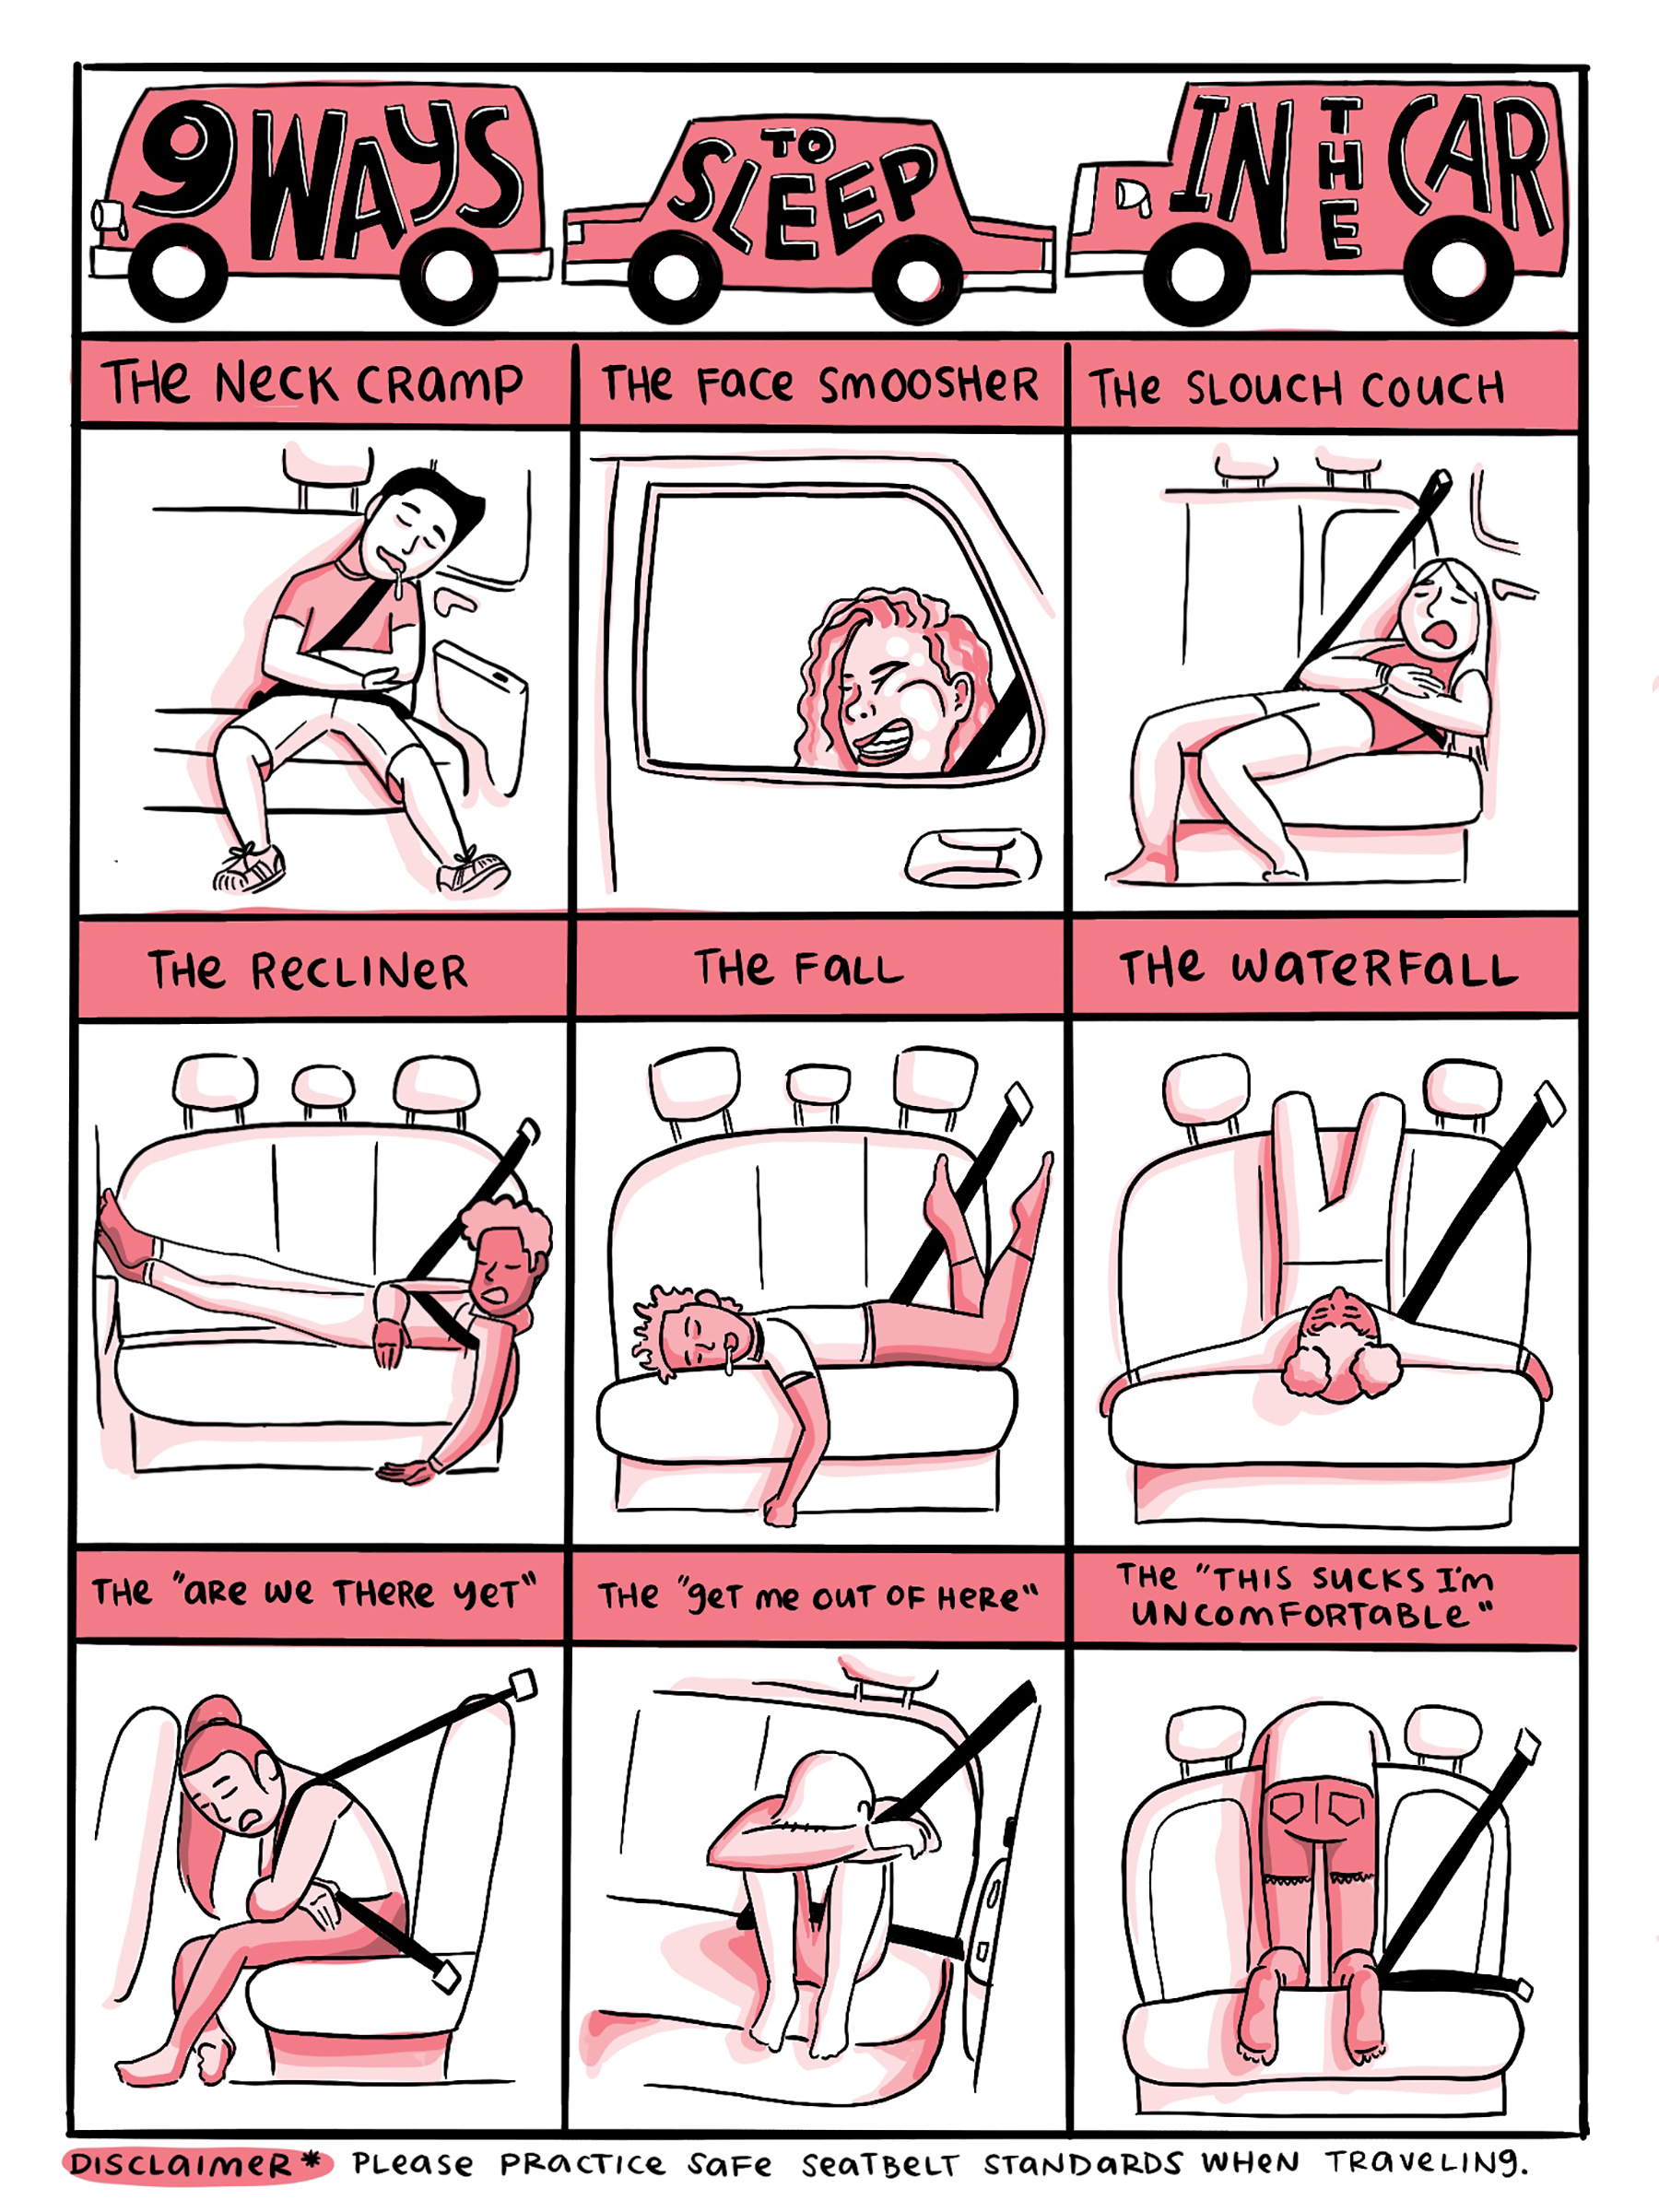 9 Ways to Sleep in a Car digital comic by Emma Leeper. Published in Souvenirs Travel Magazine, Spring 2021.